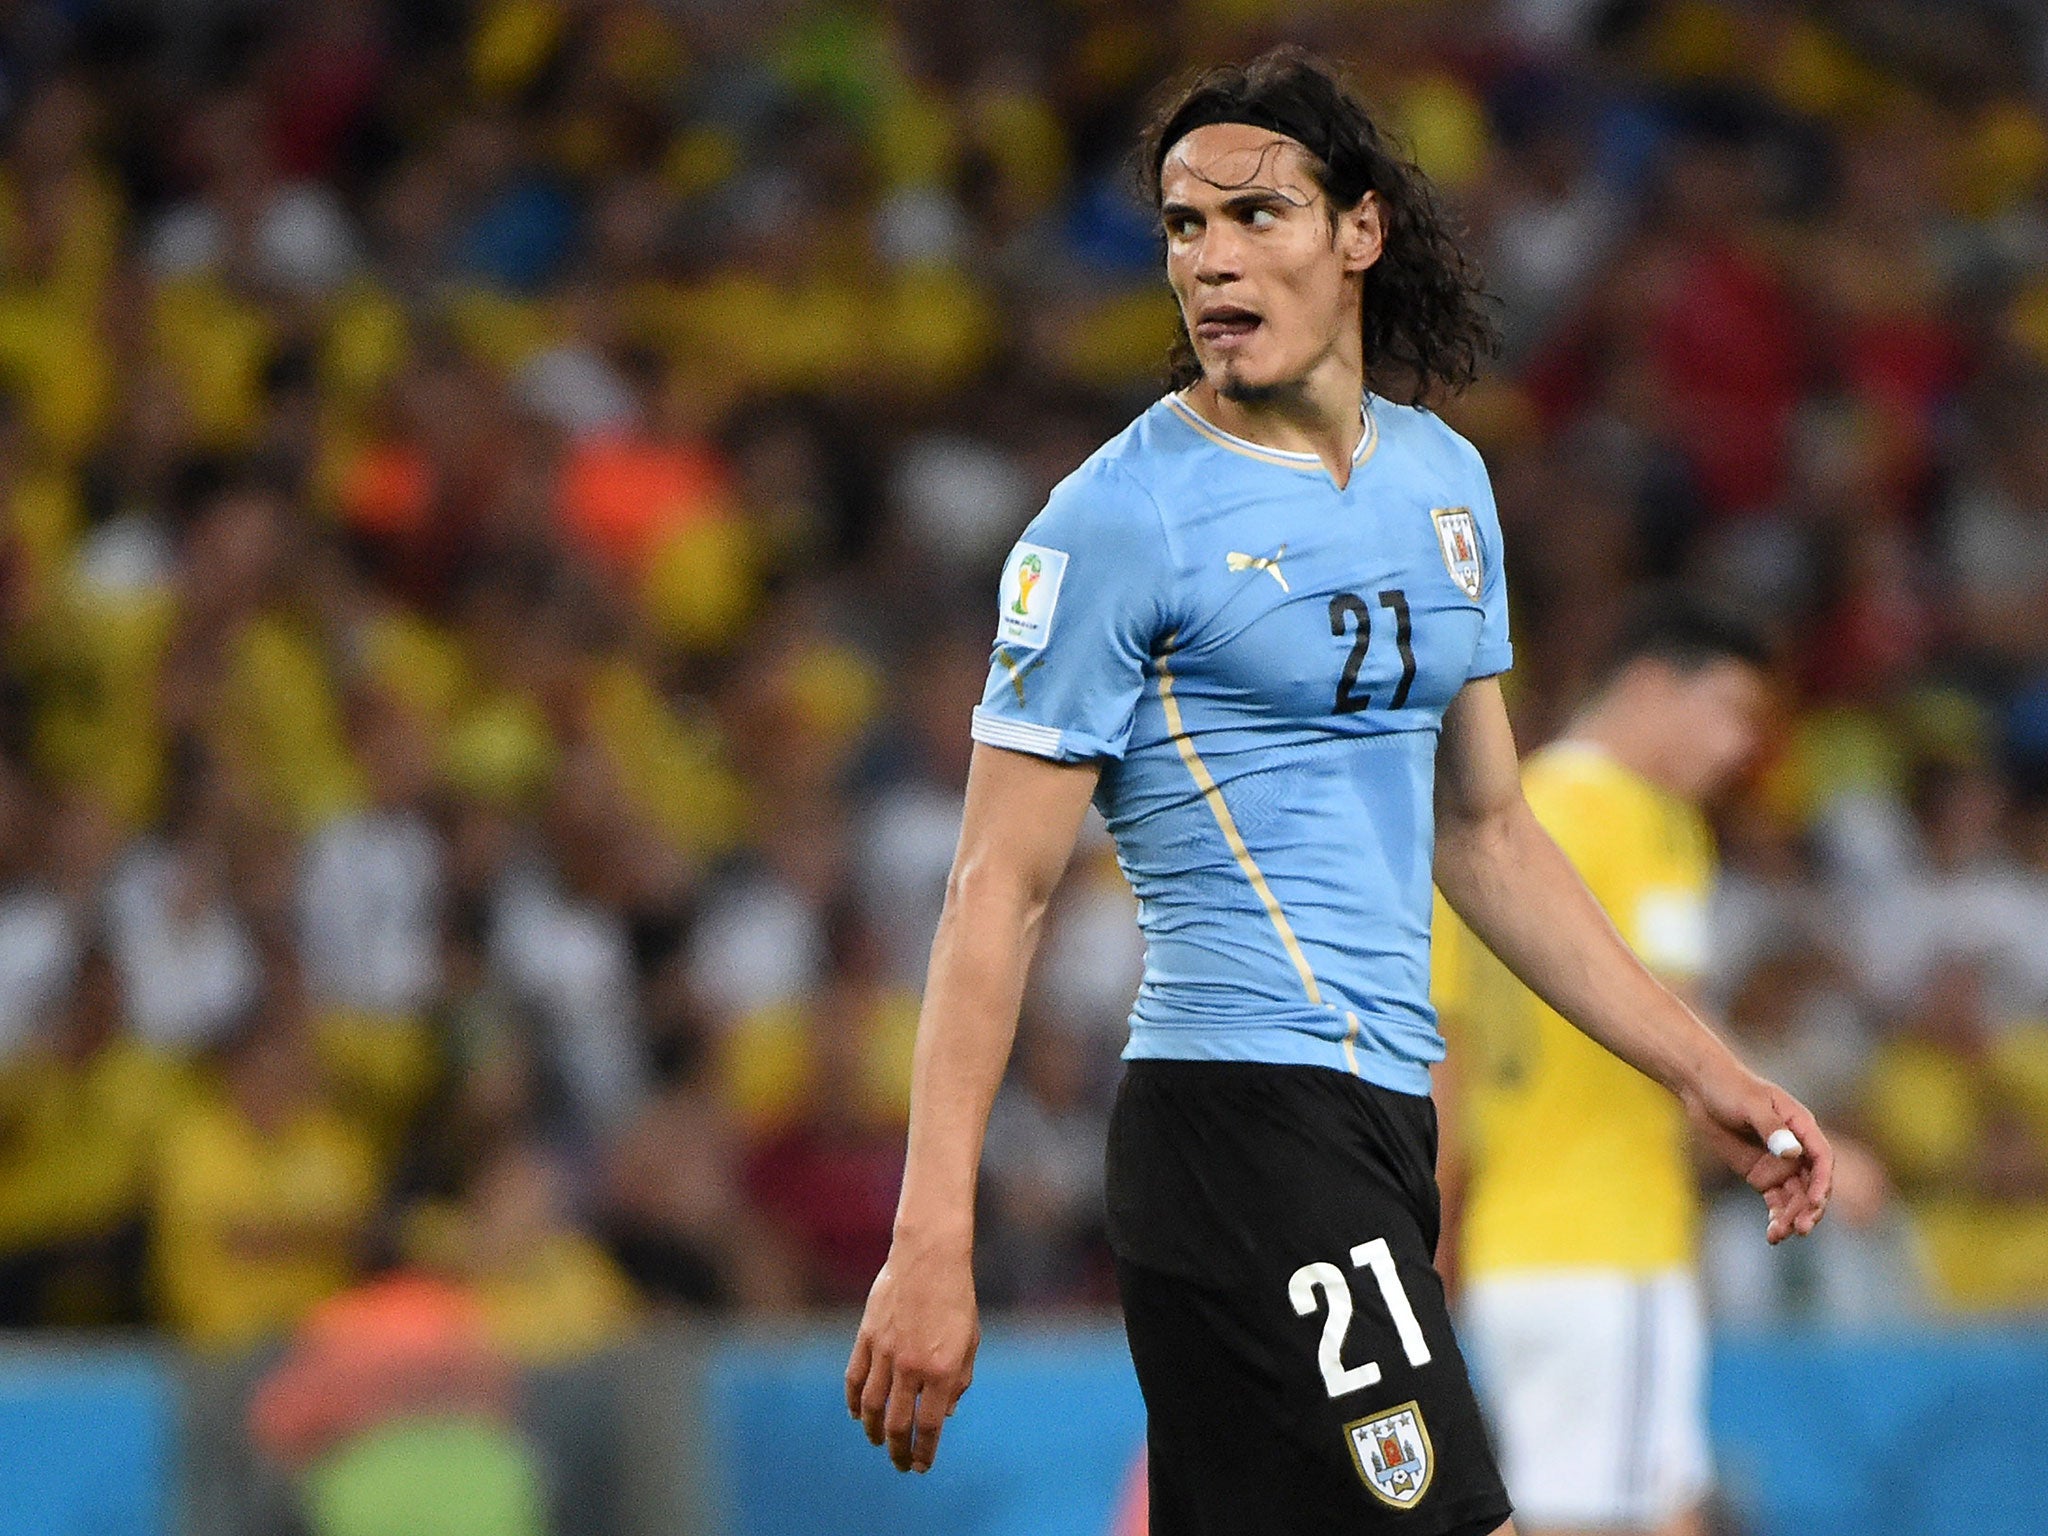 Uruguay striker Edinson Cavani could be on his way out of PSG after just one season